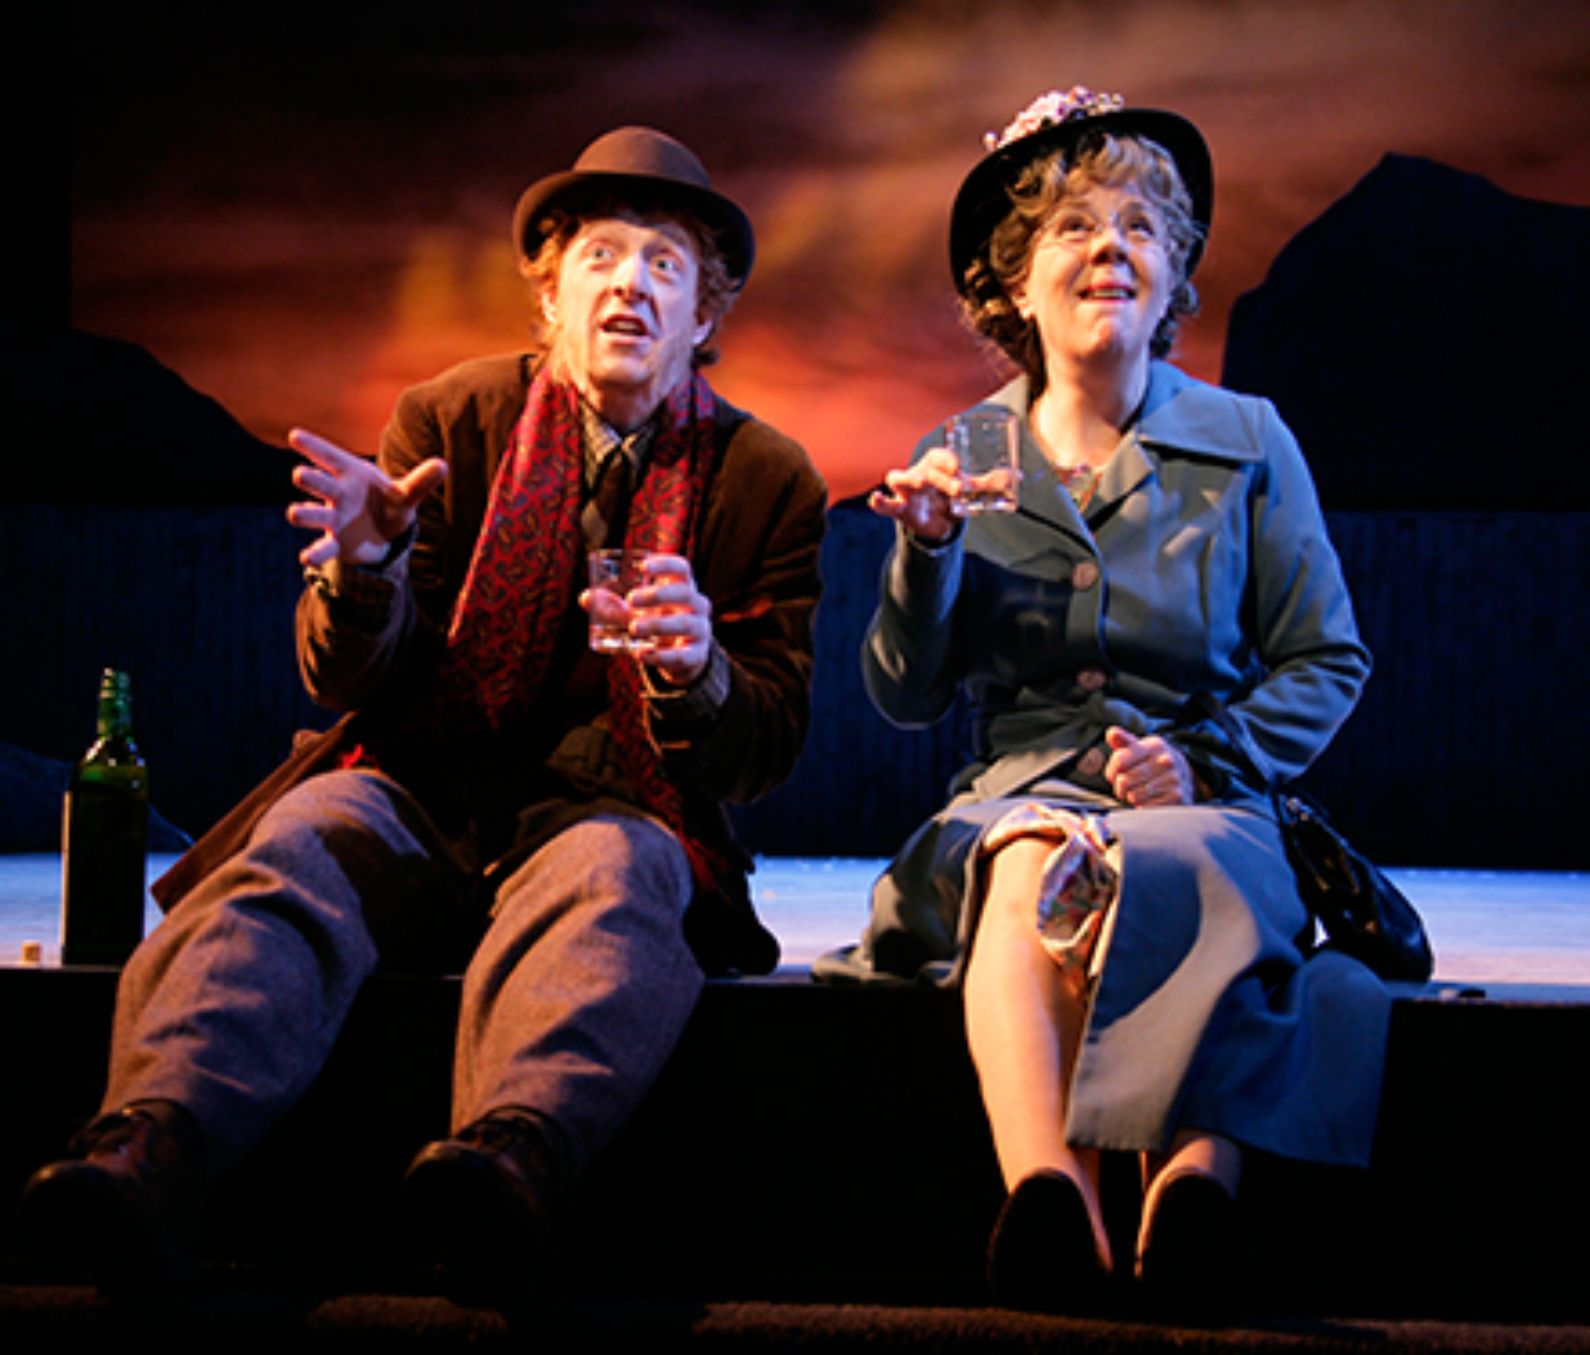 Two actors sitting on a stage looking into the audience both with looks of happiness on their face, both holding a glass with the actor on the right sitting beside a green bottle, the background is made to look like a red sky in the evening. Both are wearing hats and dressed for an outdoors setting with the actor on the left having a red scarf